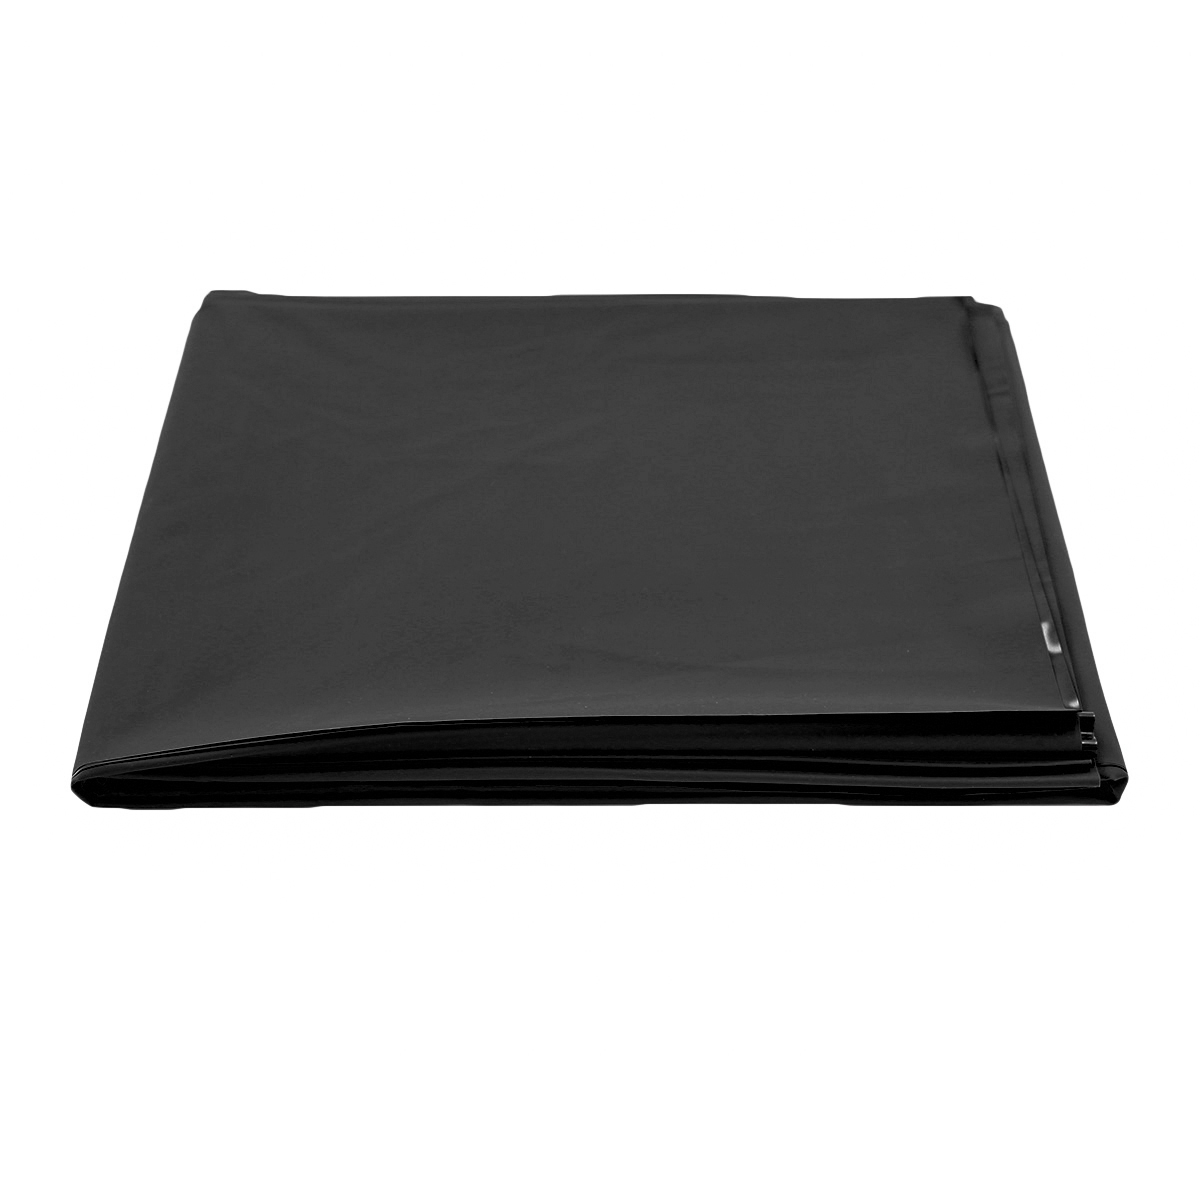 Bed-Sheet-Cover-Thin-Black-OPR-321126-1